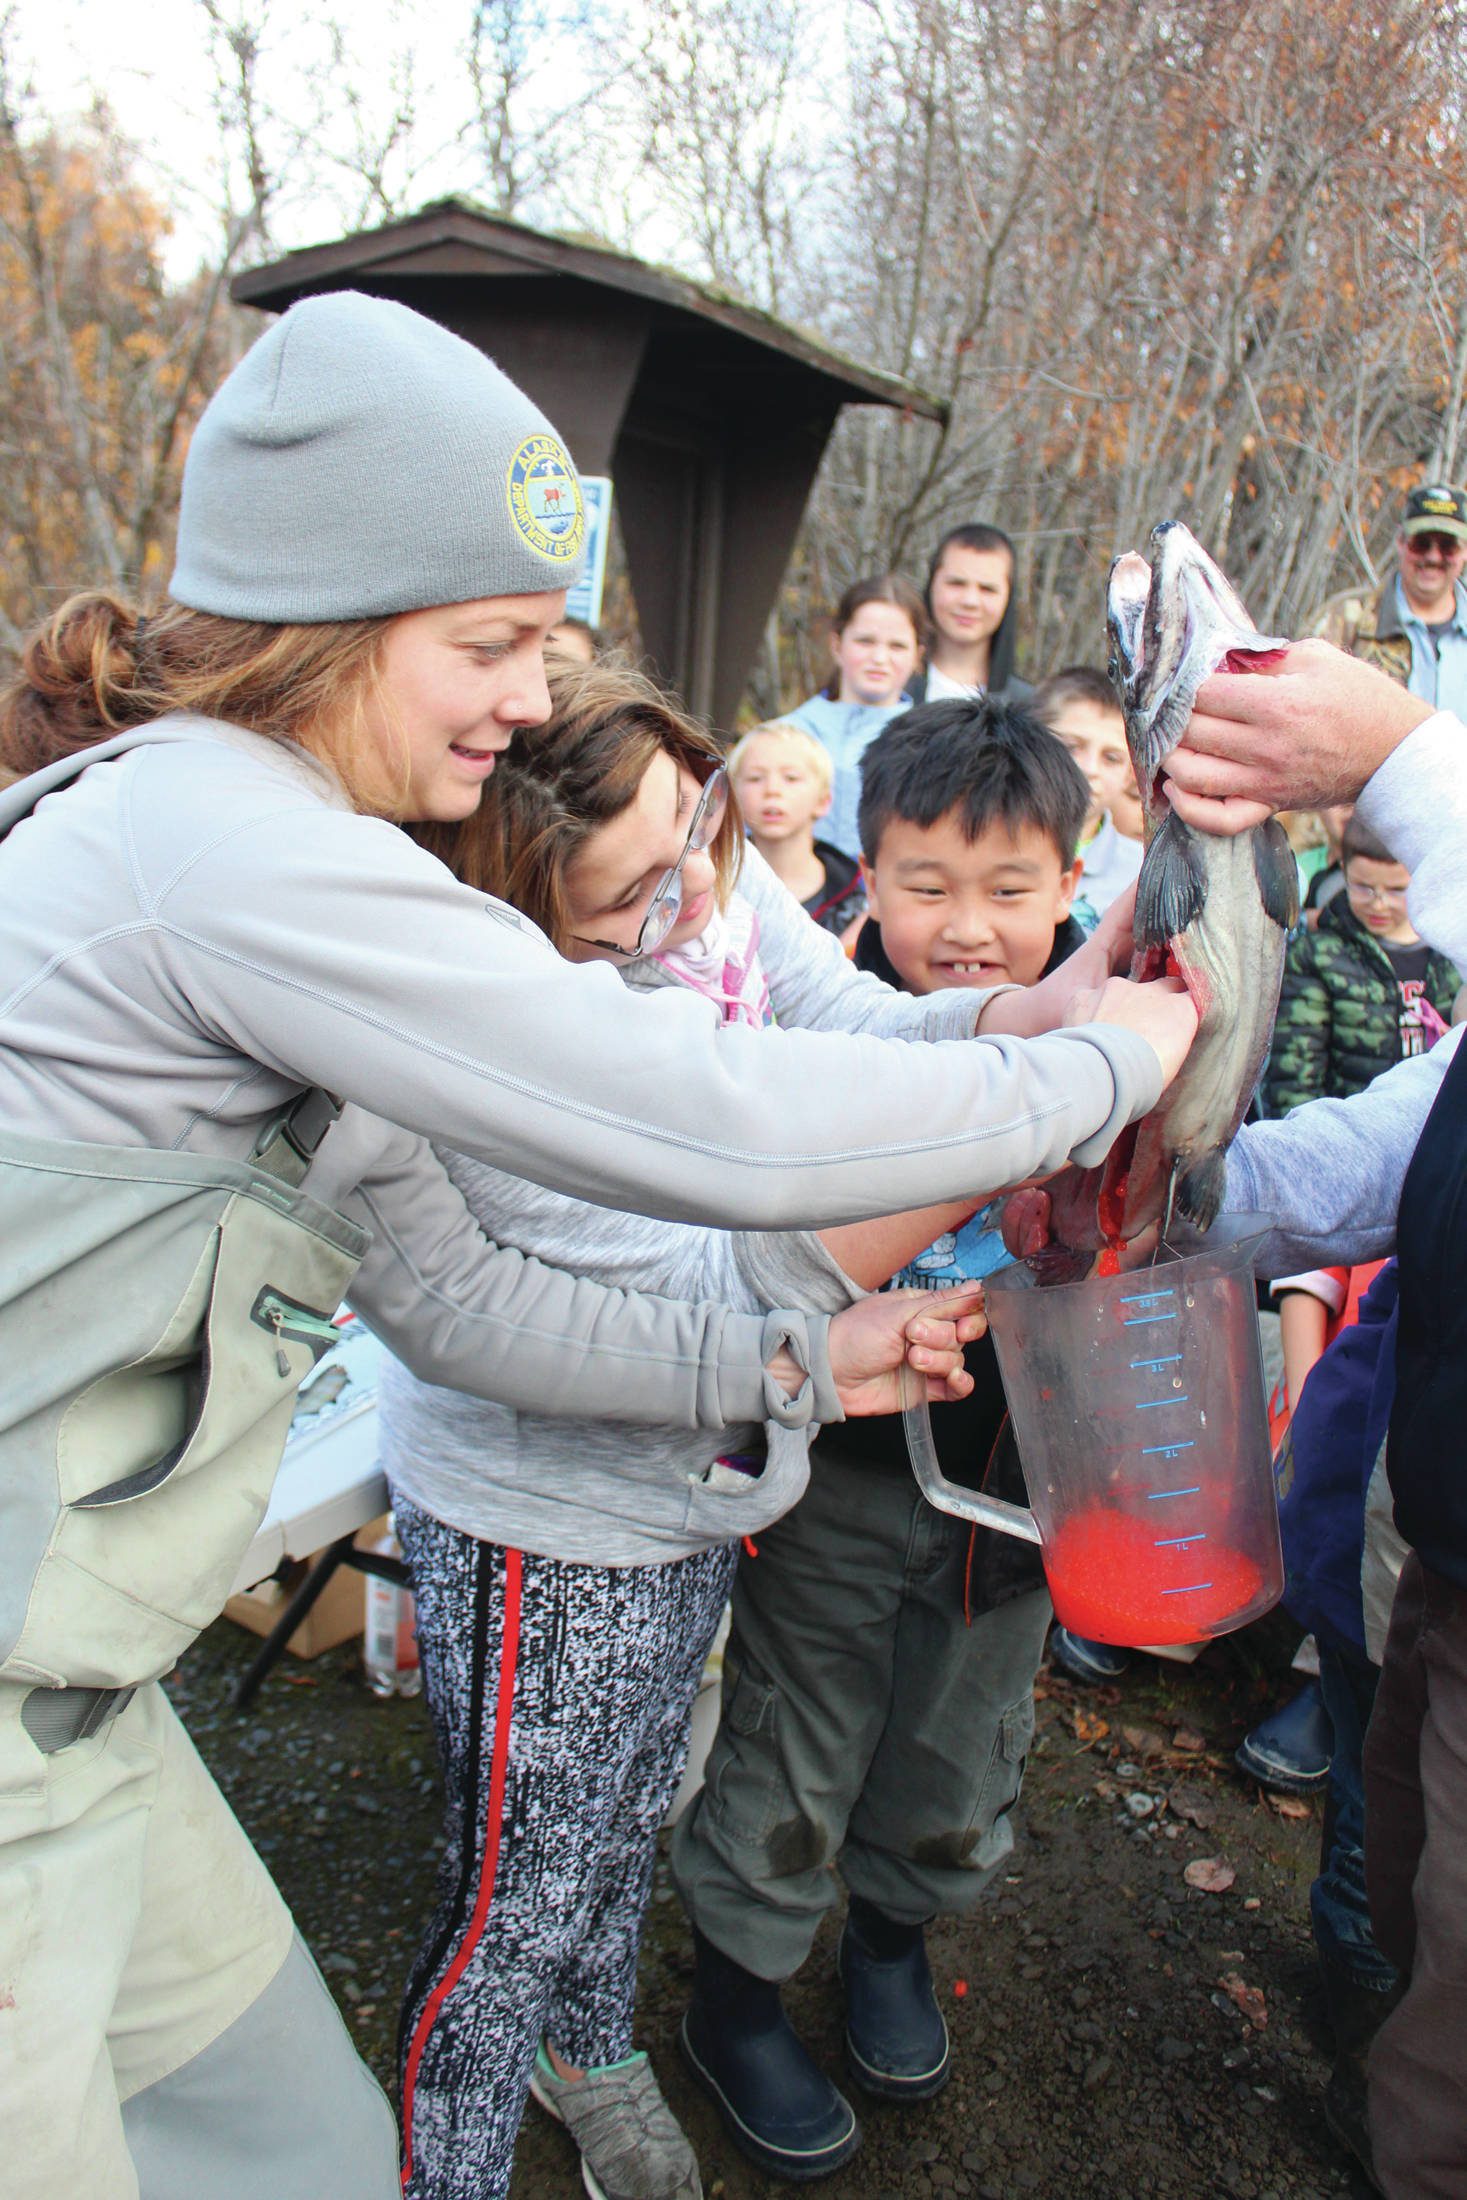 Alaska Department of Fish and Game Sport Fish Division fisheries biologist Holly Dickson helps Chapman School student Autumn Taylor-Kremer empty the eggs from a female salmon into a pitcher during the annual egg take event at the Anchor River on Thursday, Oct. 10, 2019 in Anchor Point, Alaska. The egg take is the first phase of the Salmon in the Classroom project. (Photo by Megan Pacer/Homer News)